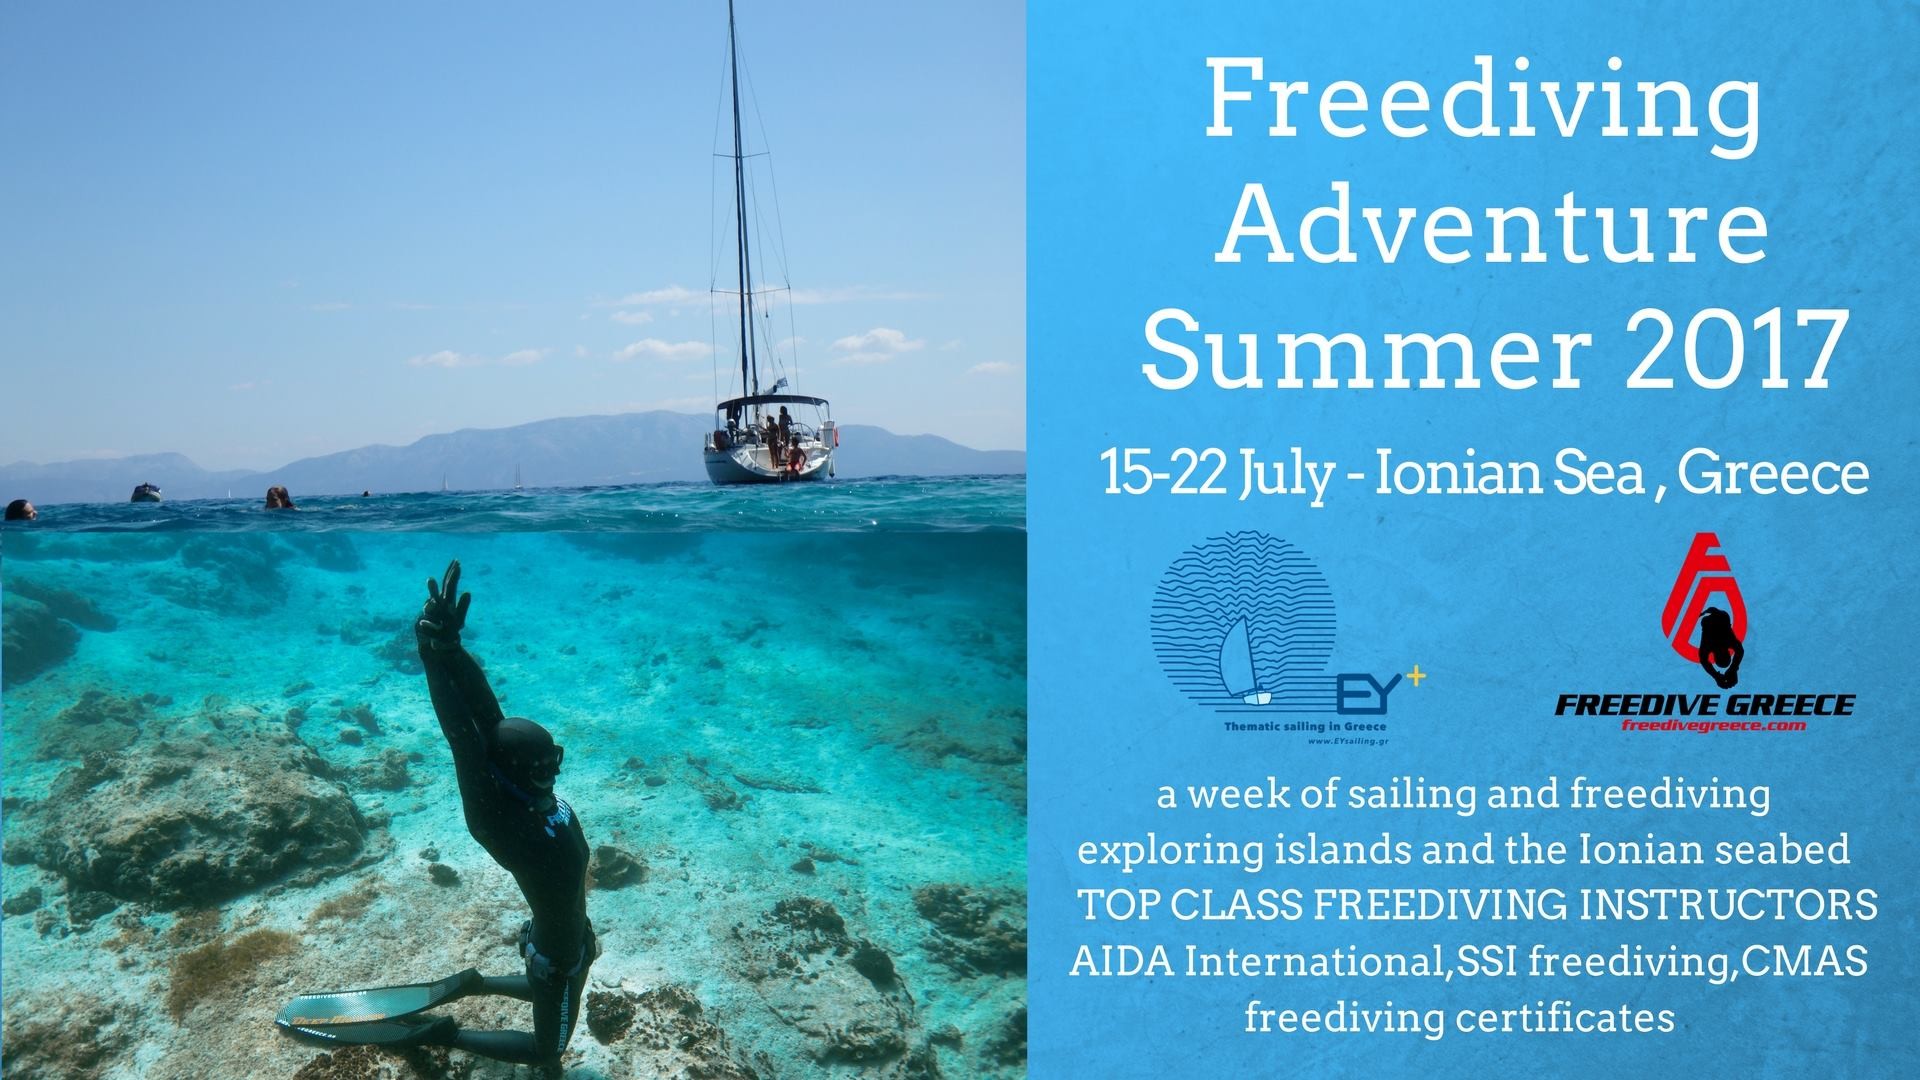 Combine Sailing With Freediving via EYSailing and Freedive Greece